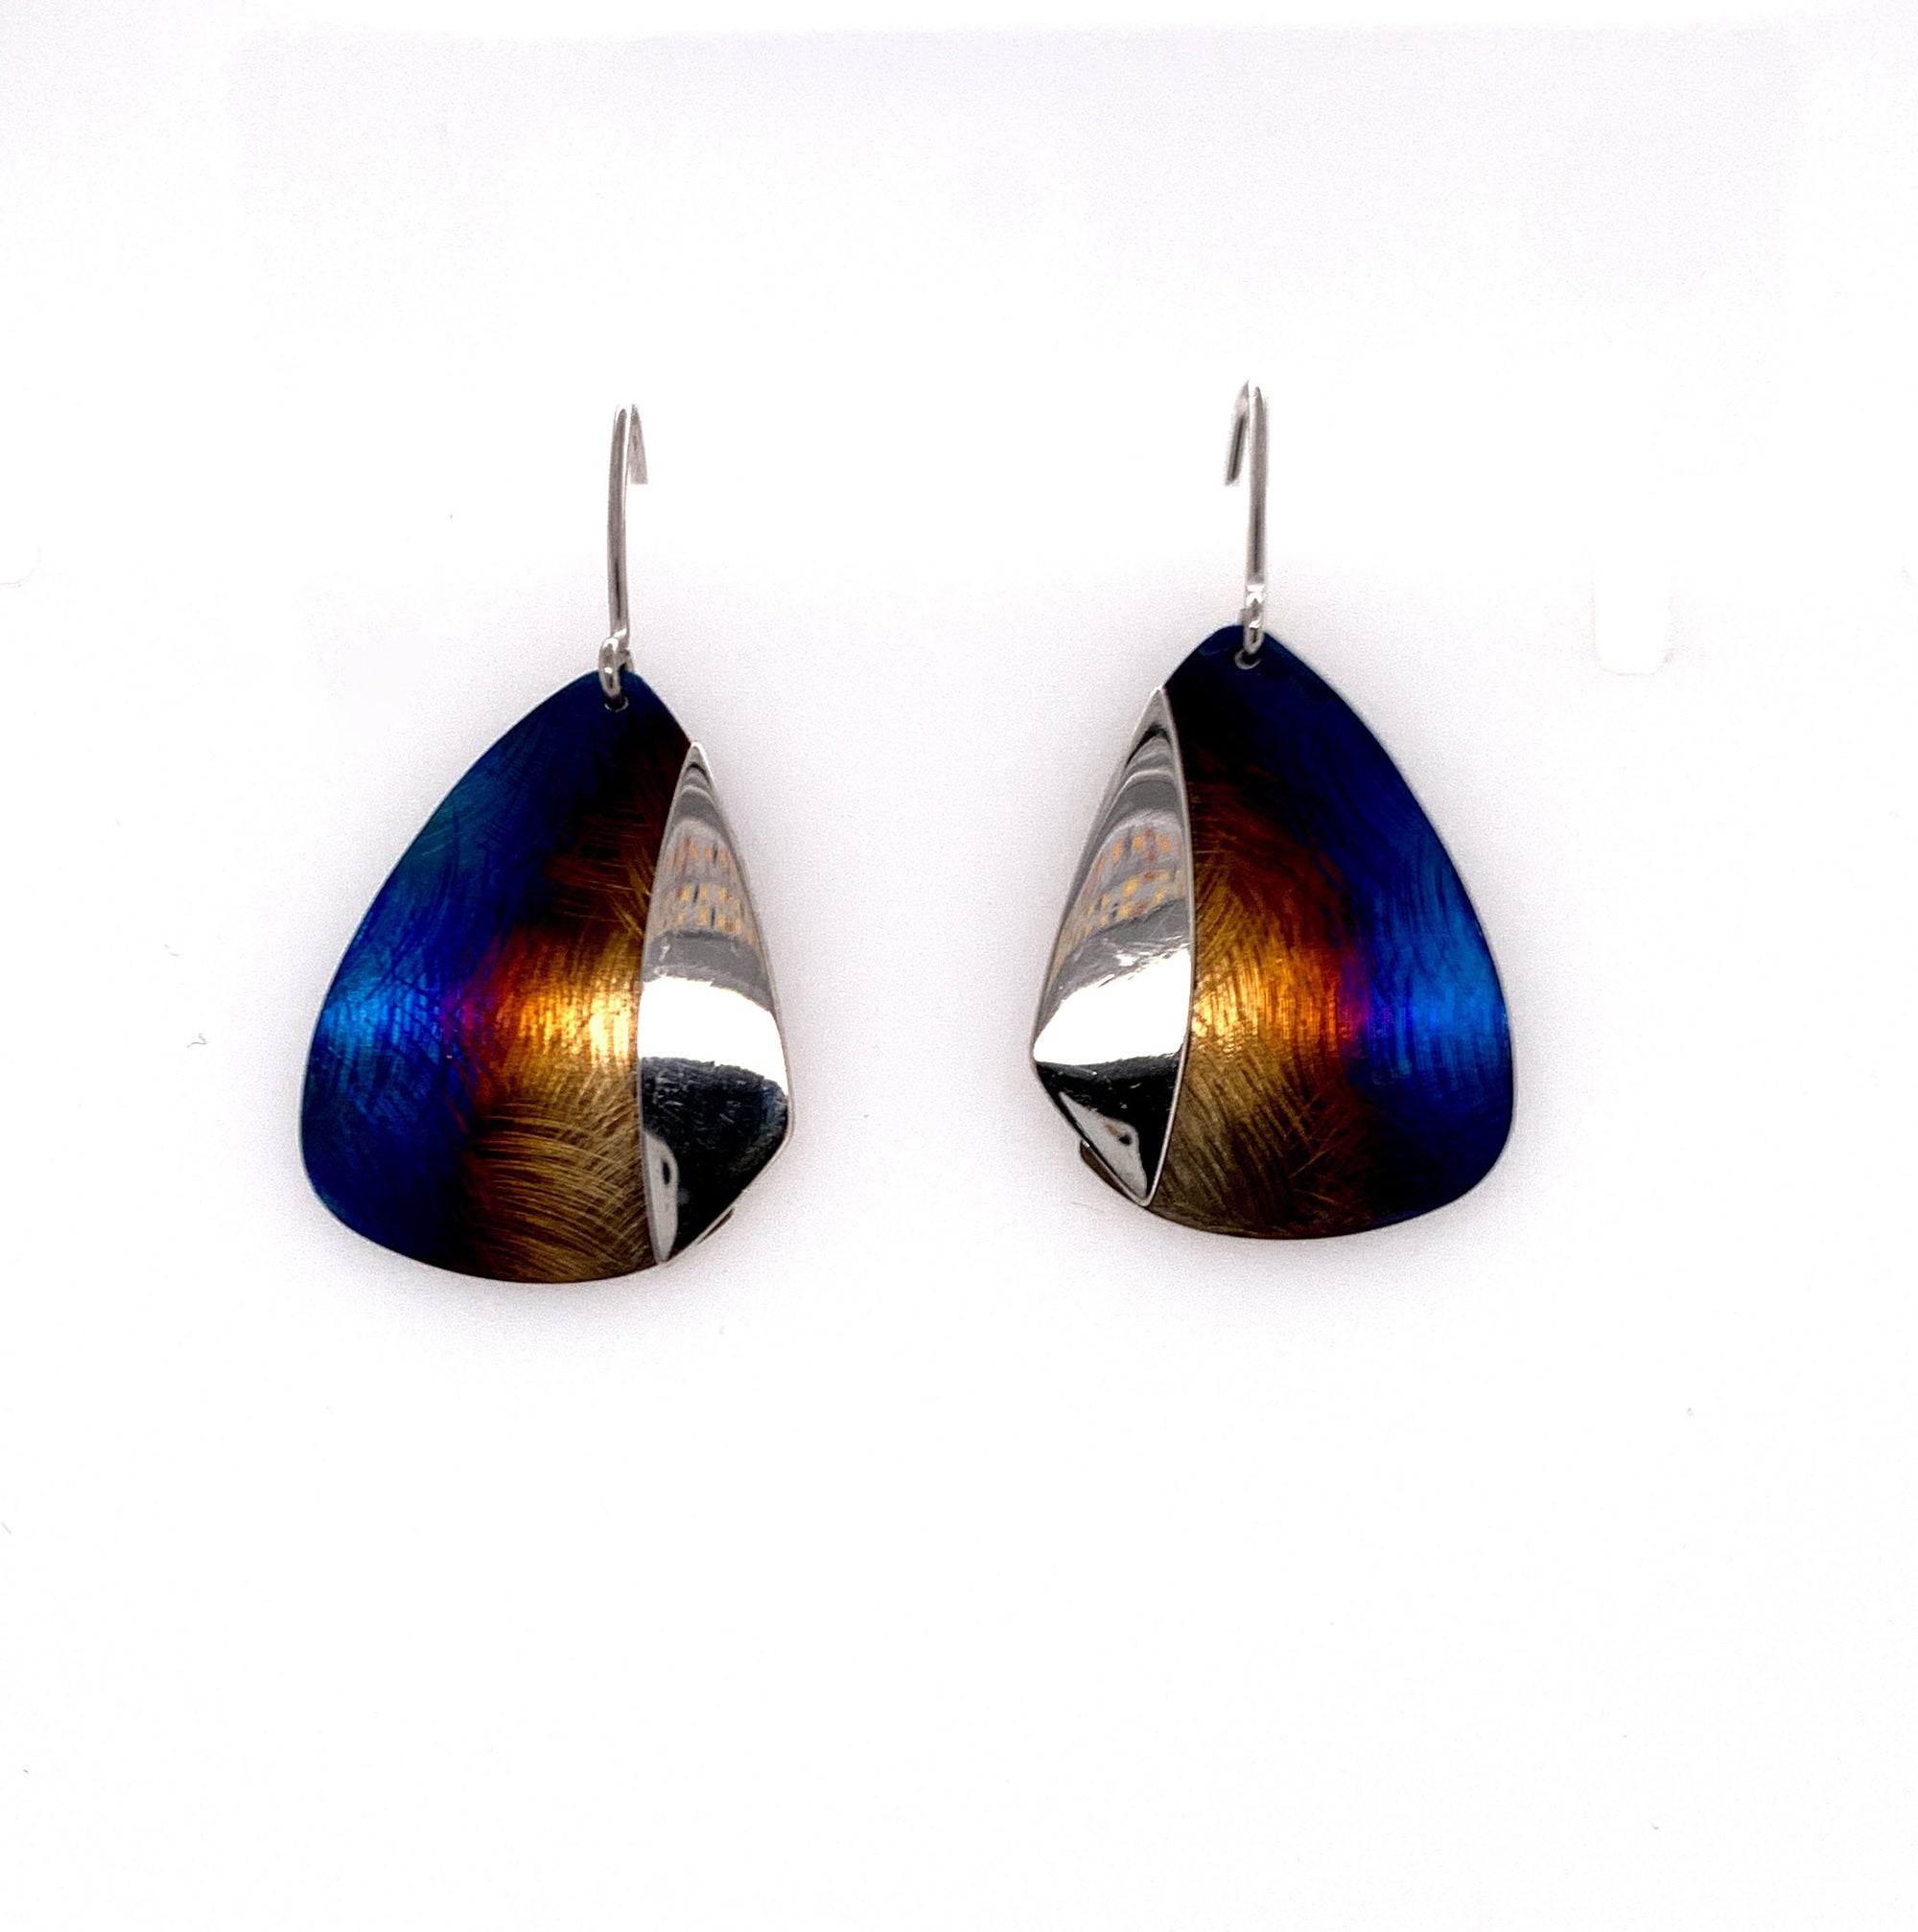 Titanium and Silver Earrings.